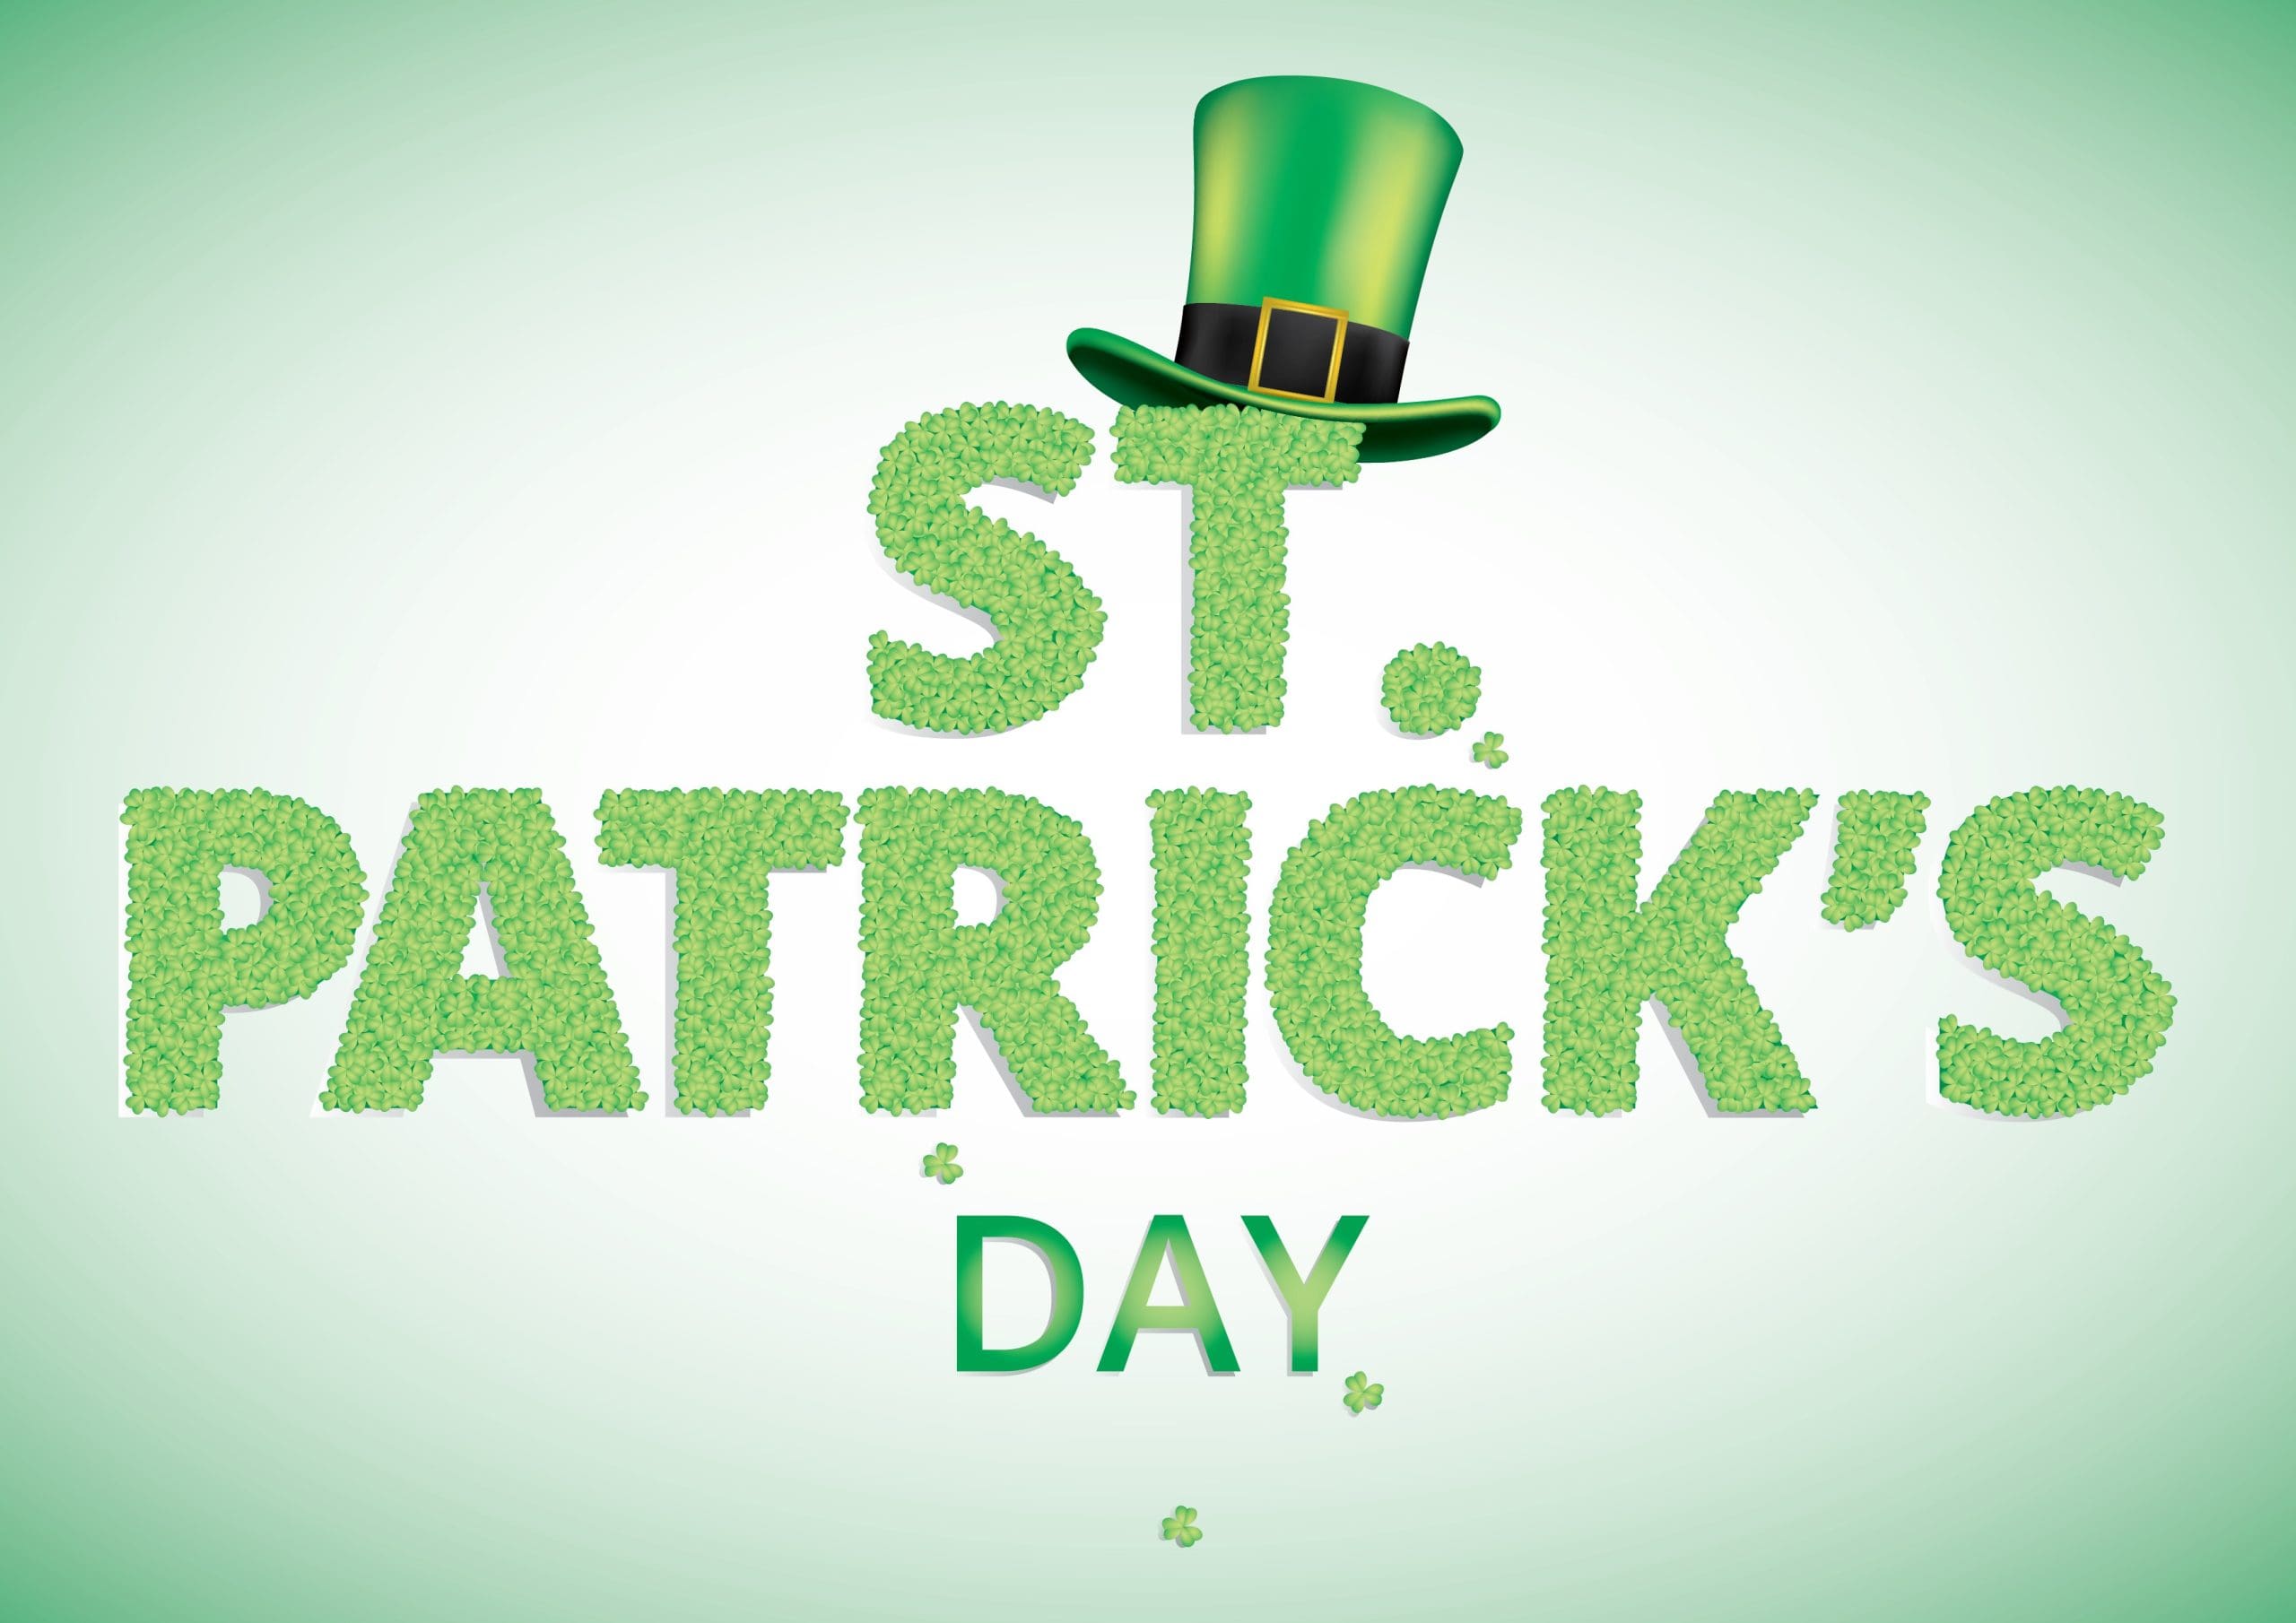 Creative Marketing Ideas for Saint Patrick’s Day – March 17th